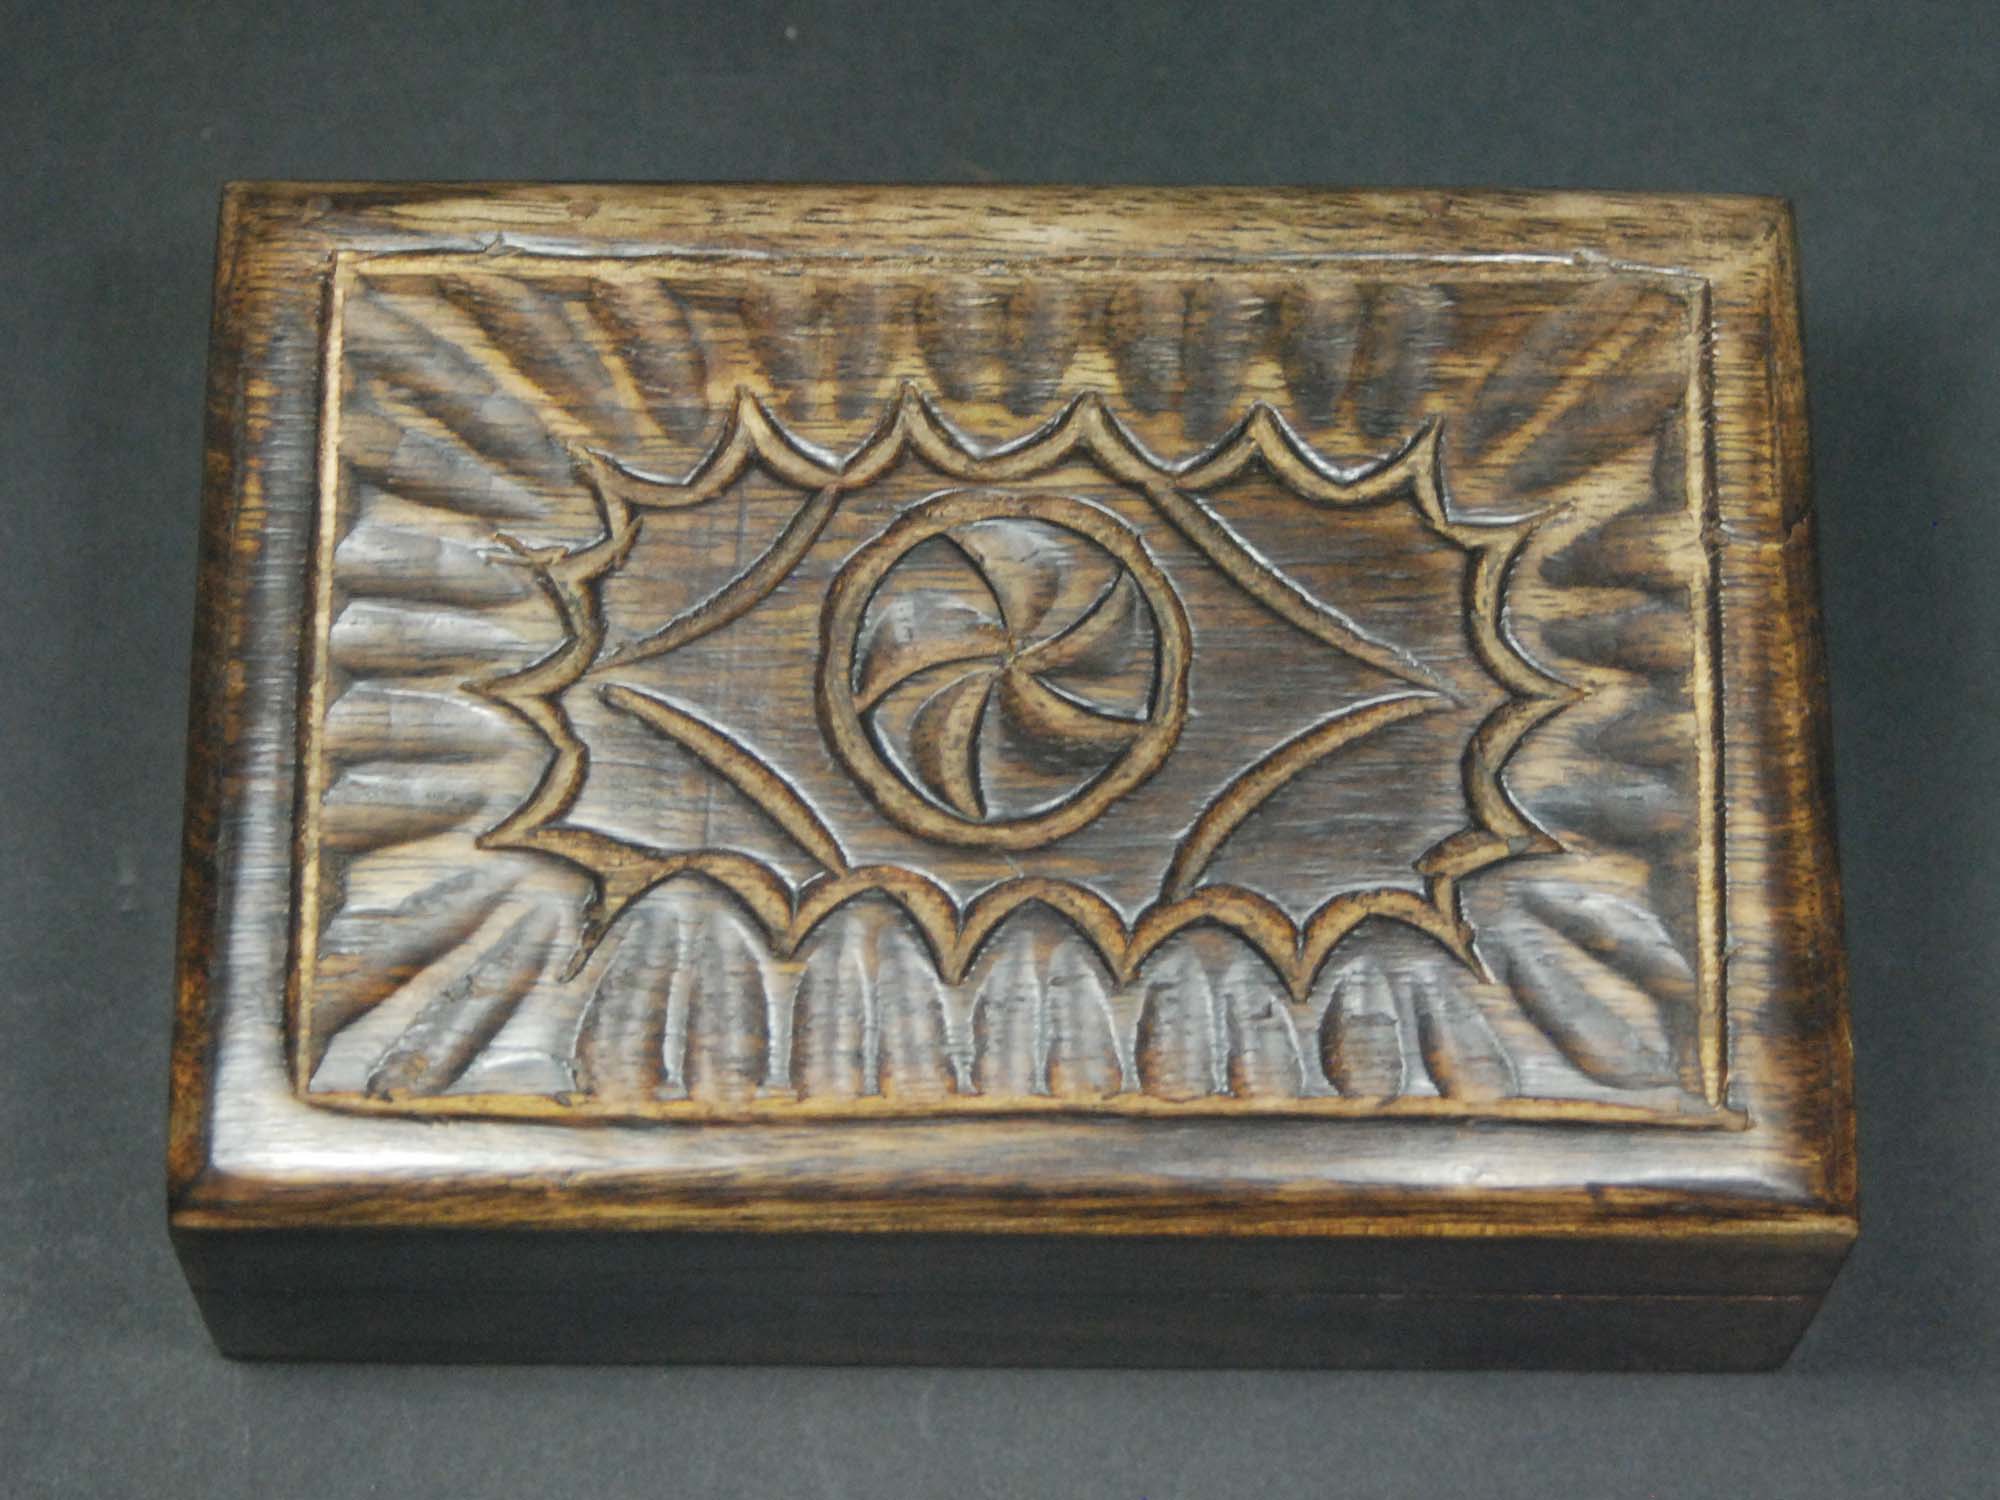 Treasure Chest: Small, Floral, Carved - 1136-20-406 (8UW10)